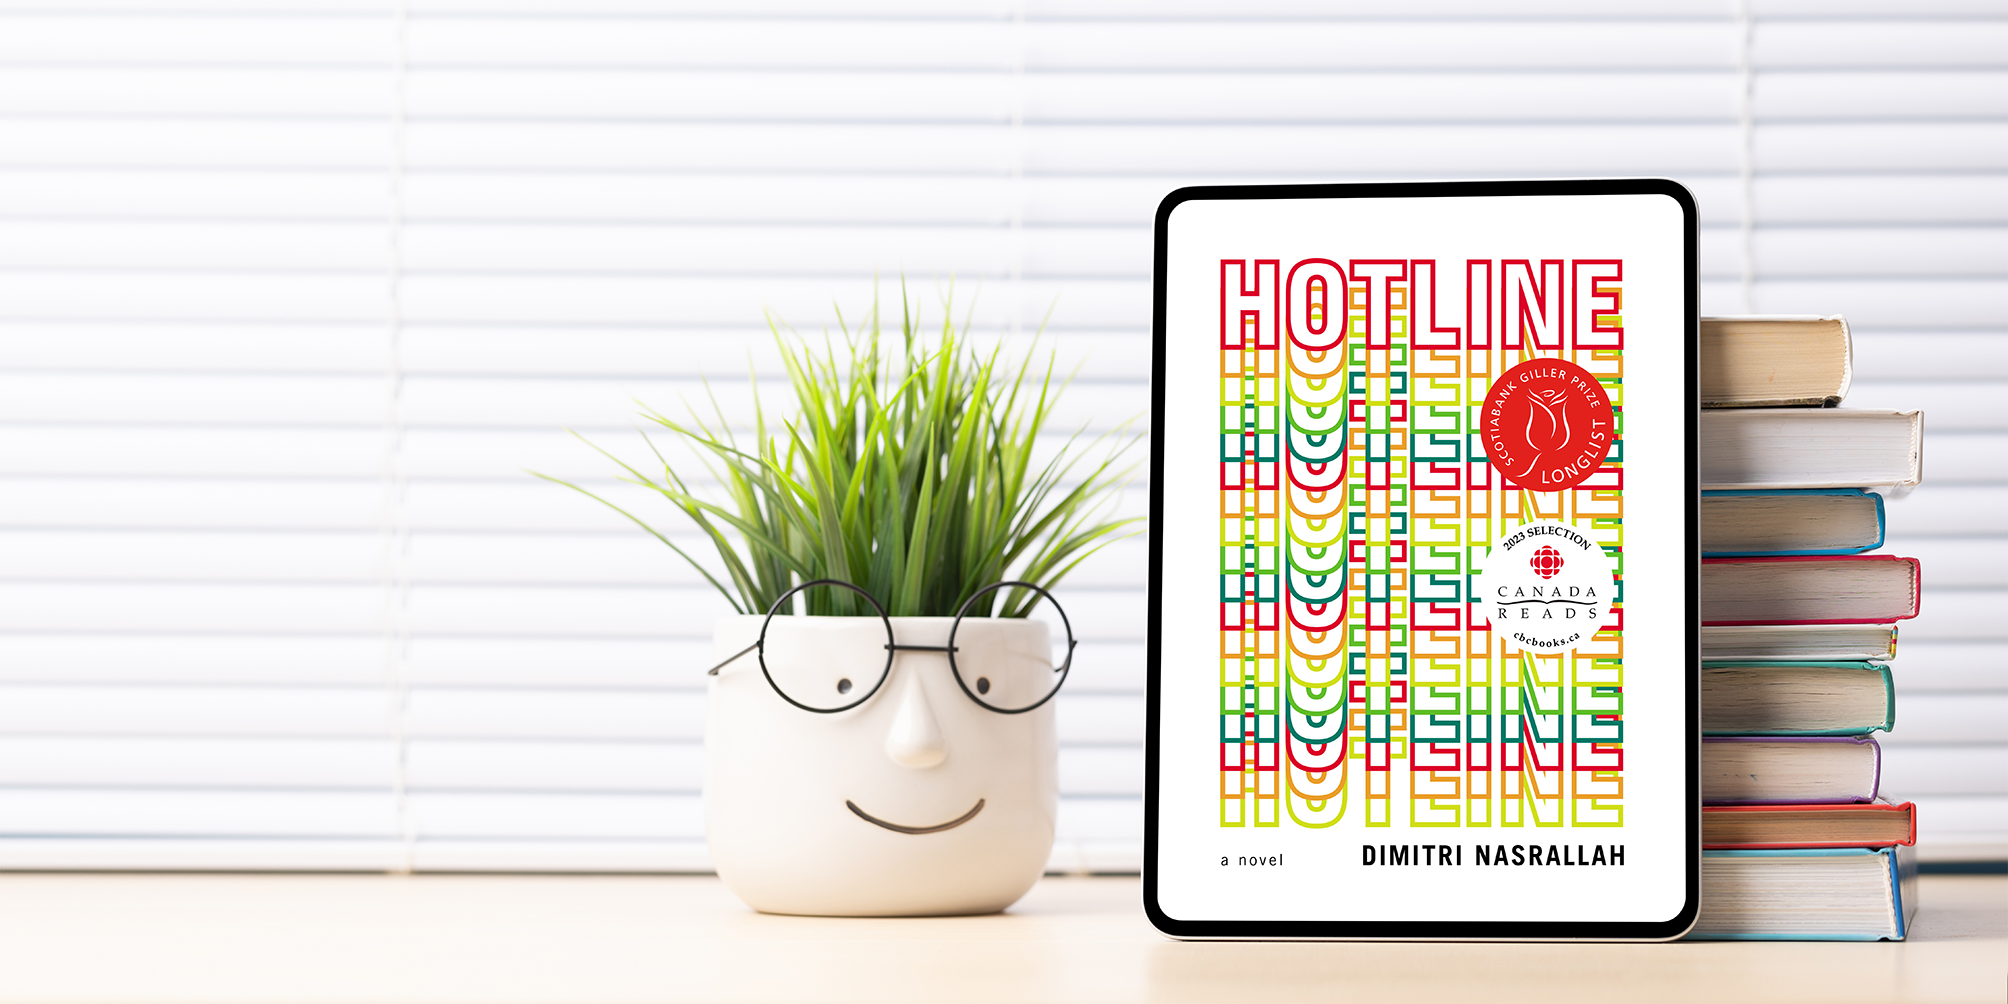 Standing on a wooden table, a tablet shows the book cover for Hotline by Dimitri Nasrallah, which features the word Hotline cascading down the cover. A stack of books props the tablet up. A small plant with a ceramic face wearing glasses sits next to the tablet.